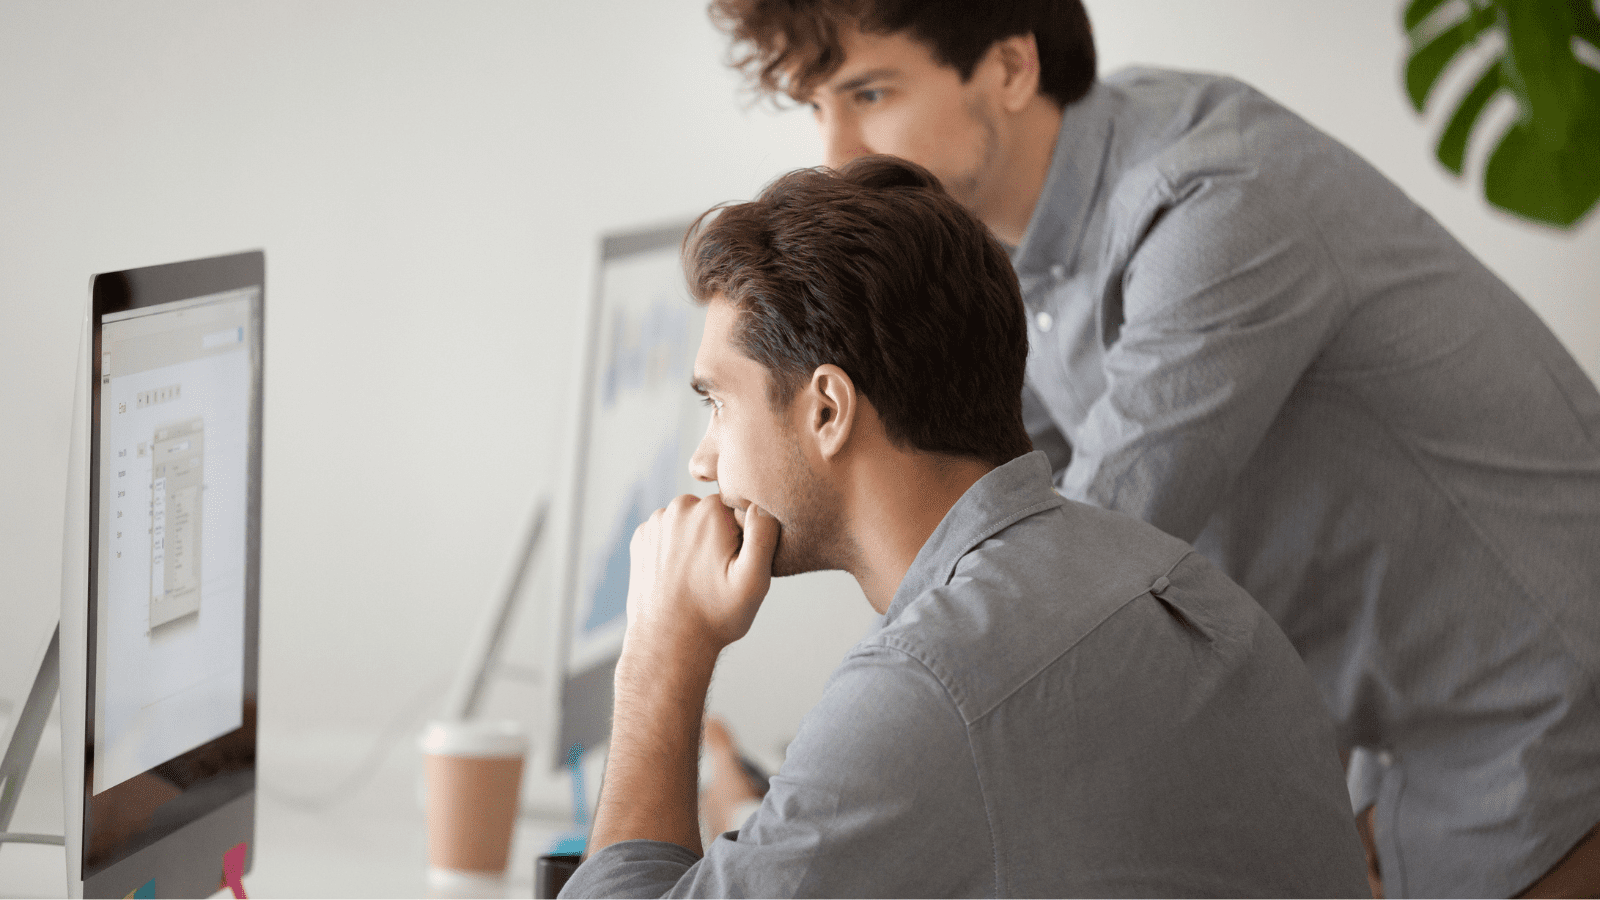 Caucasian male coach helping colleague with computer issues in office